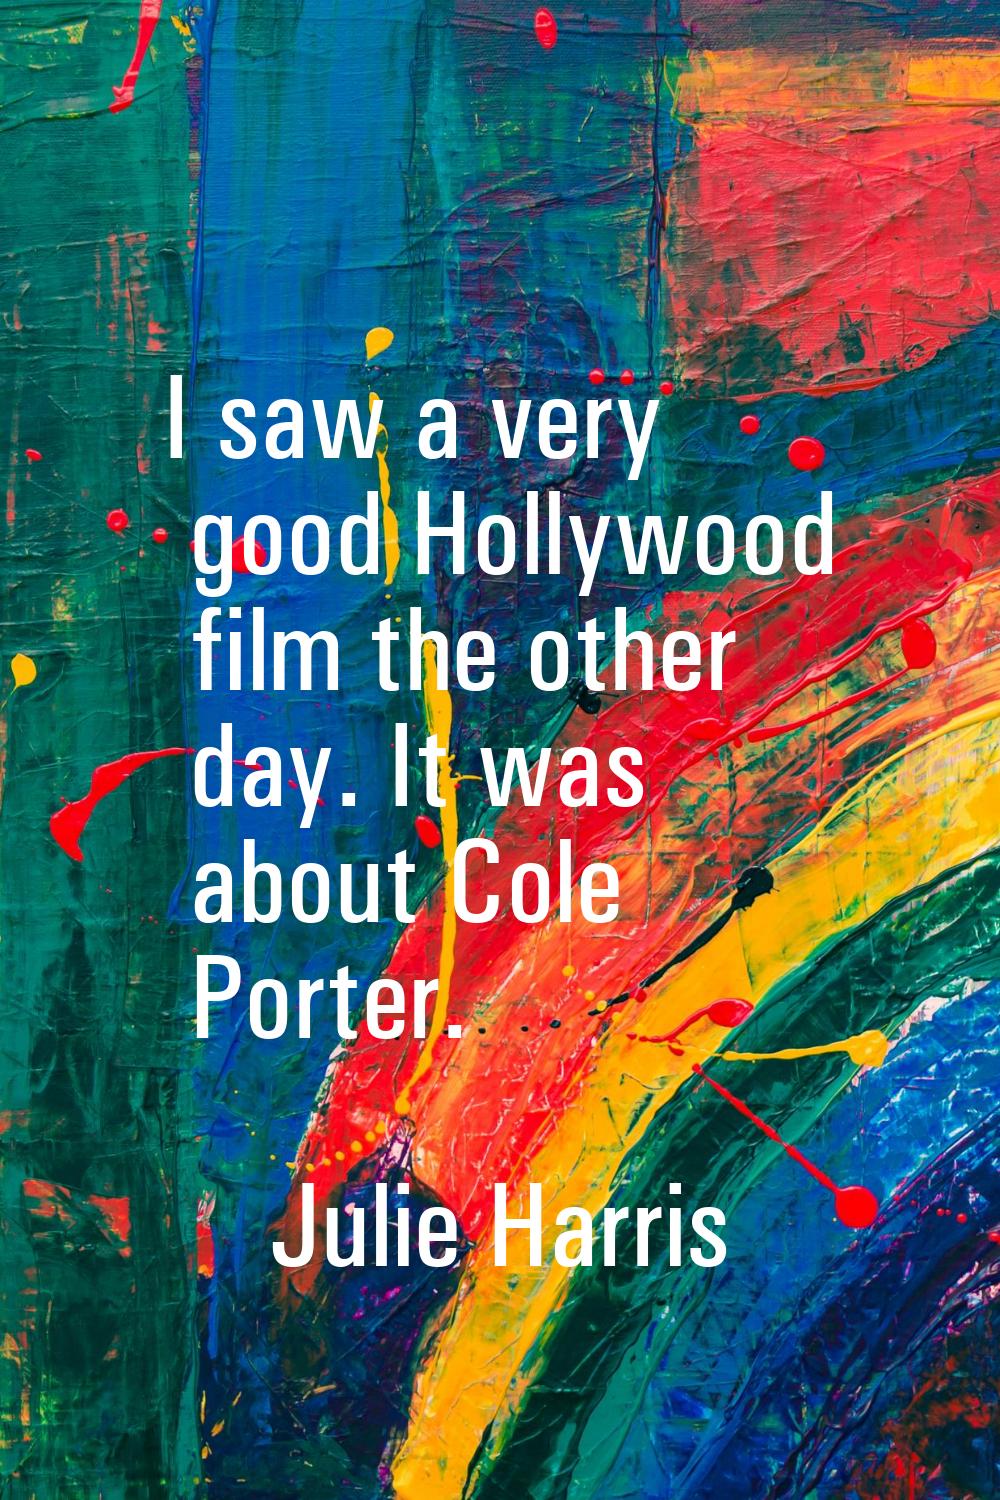 I saw a very good Hollywood film the other day. It was about Cole Porter.